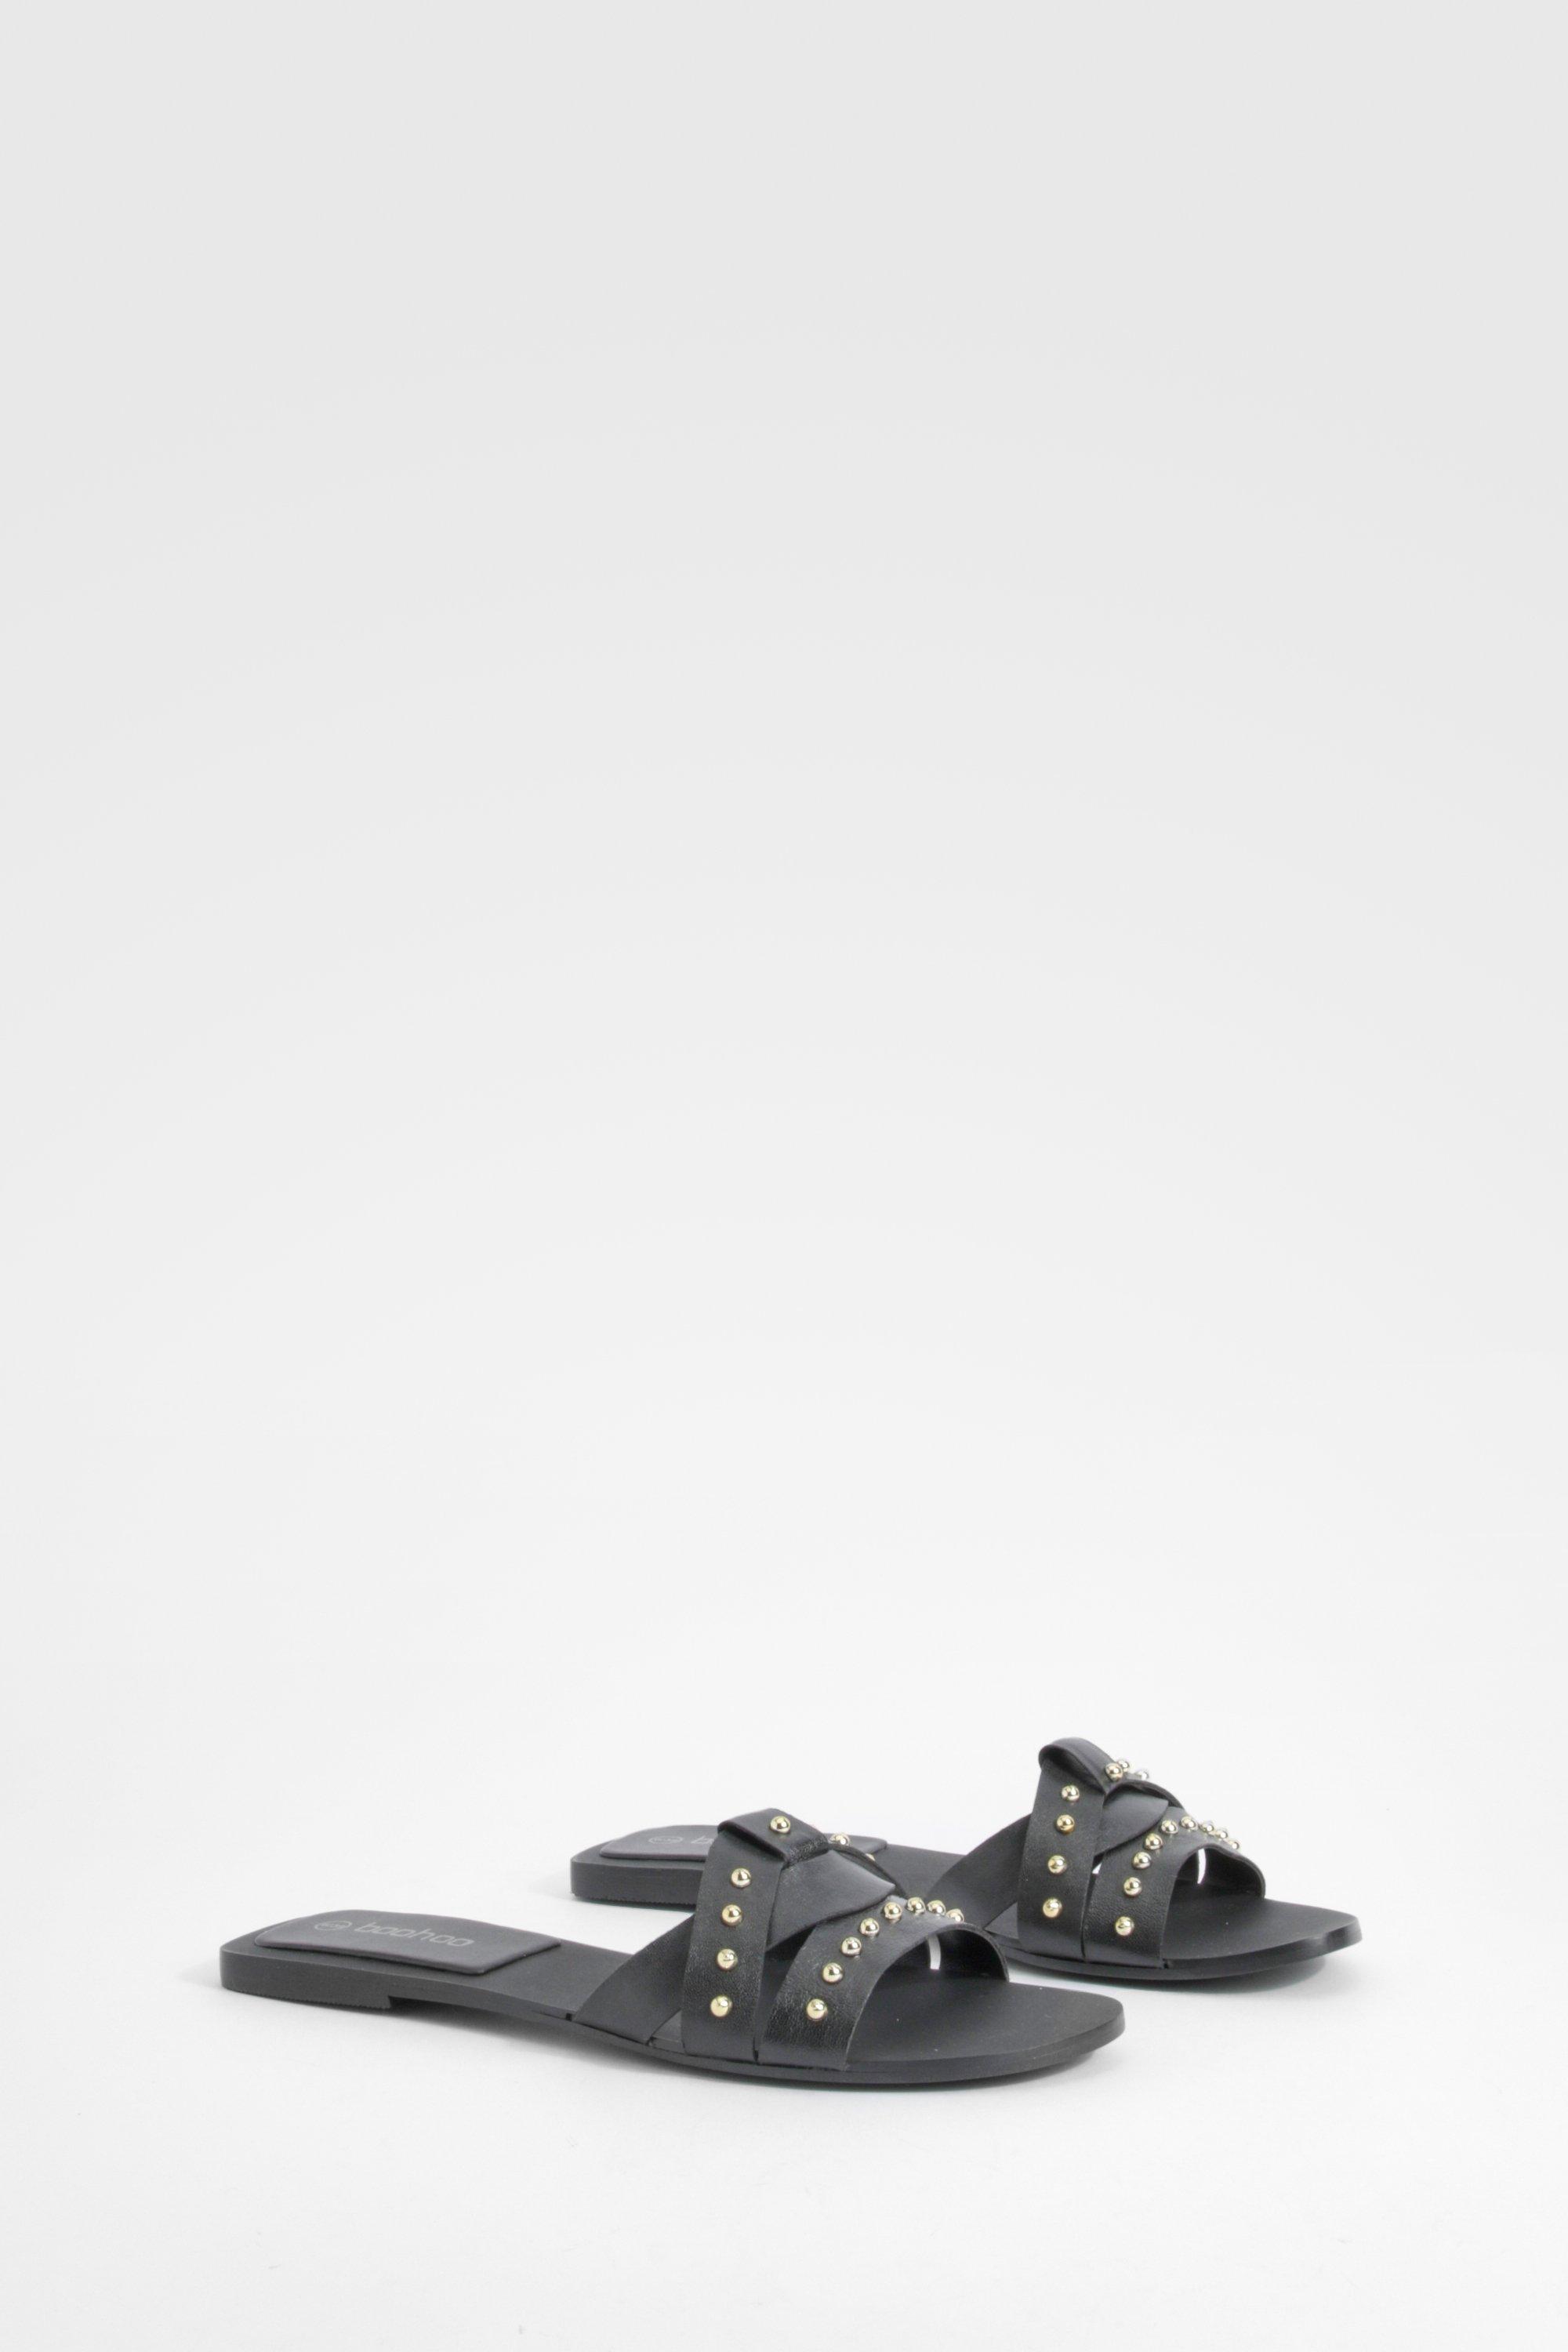 Image of Studded Woven Leather Mule Sandals, Nero